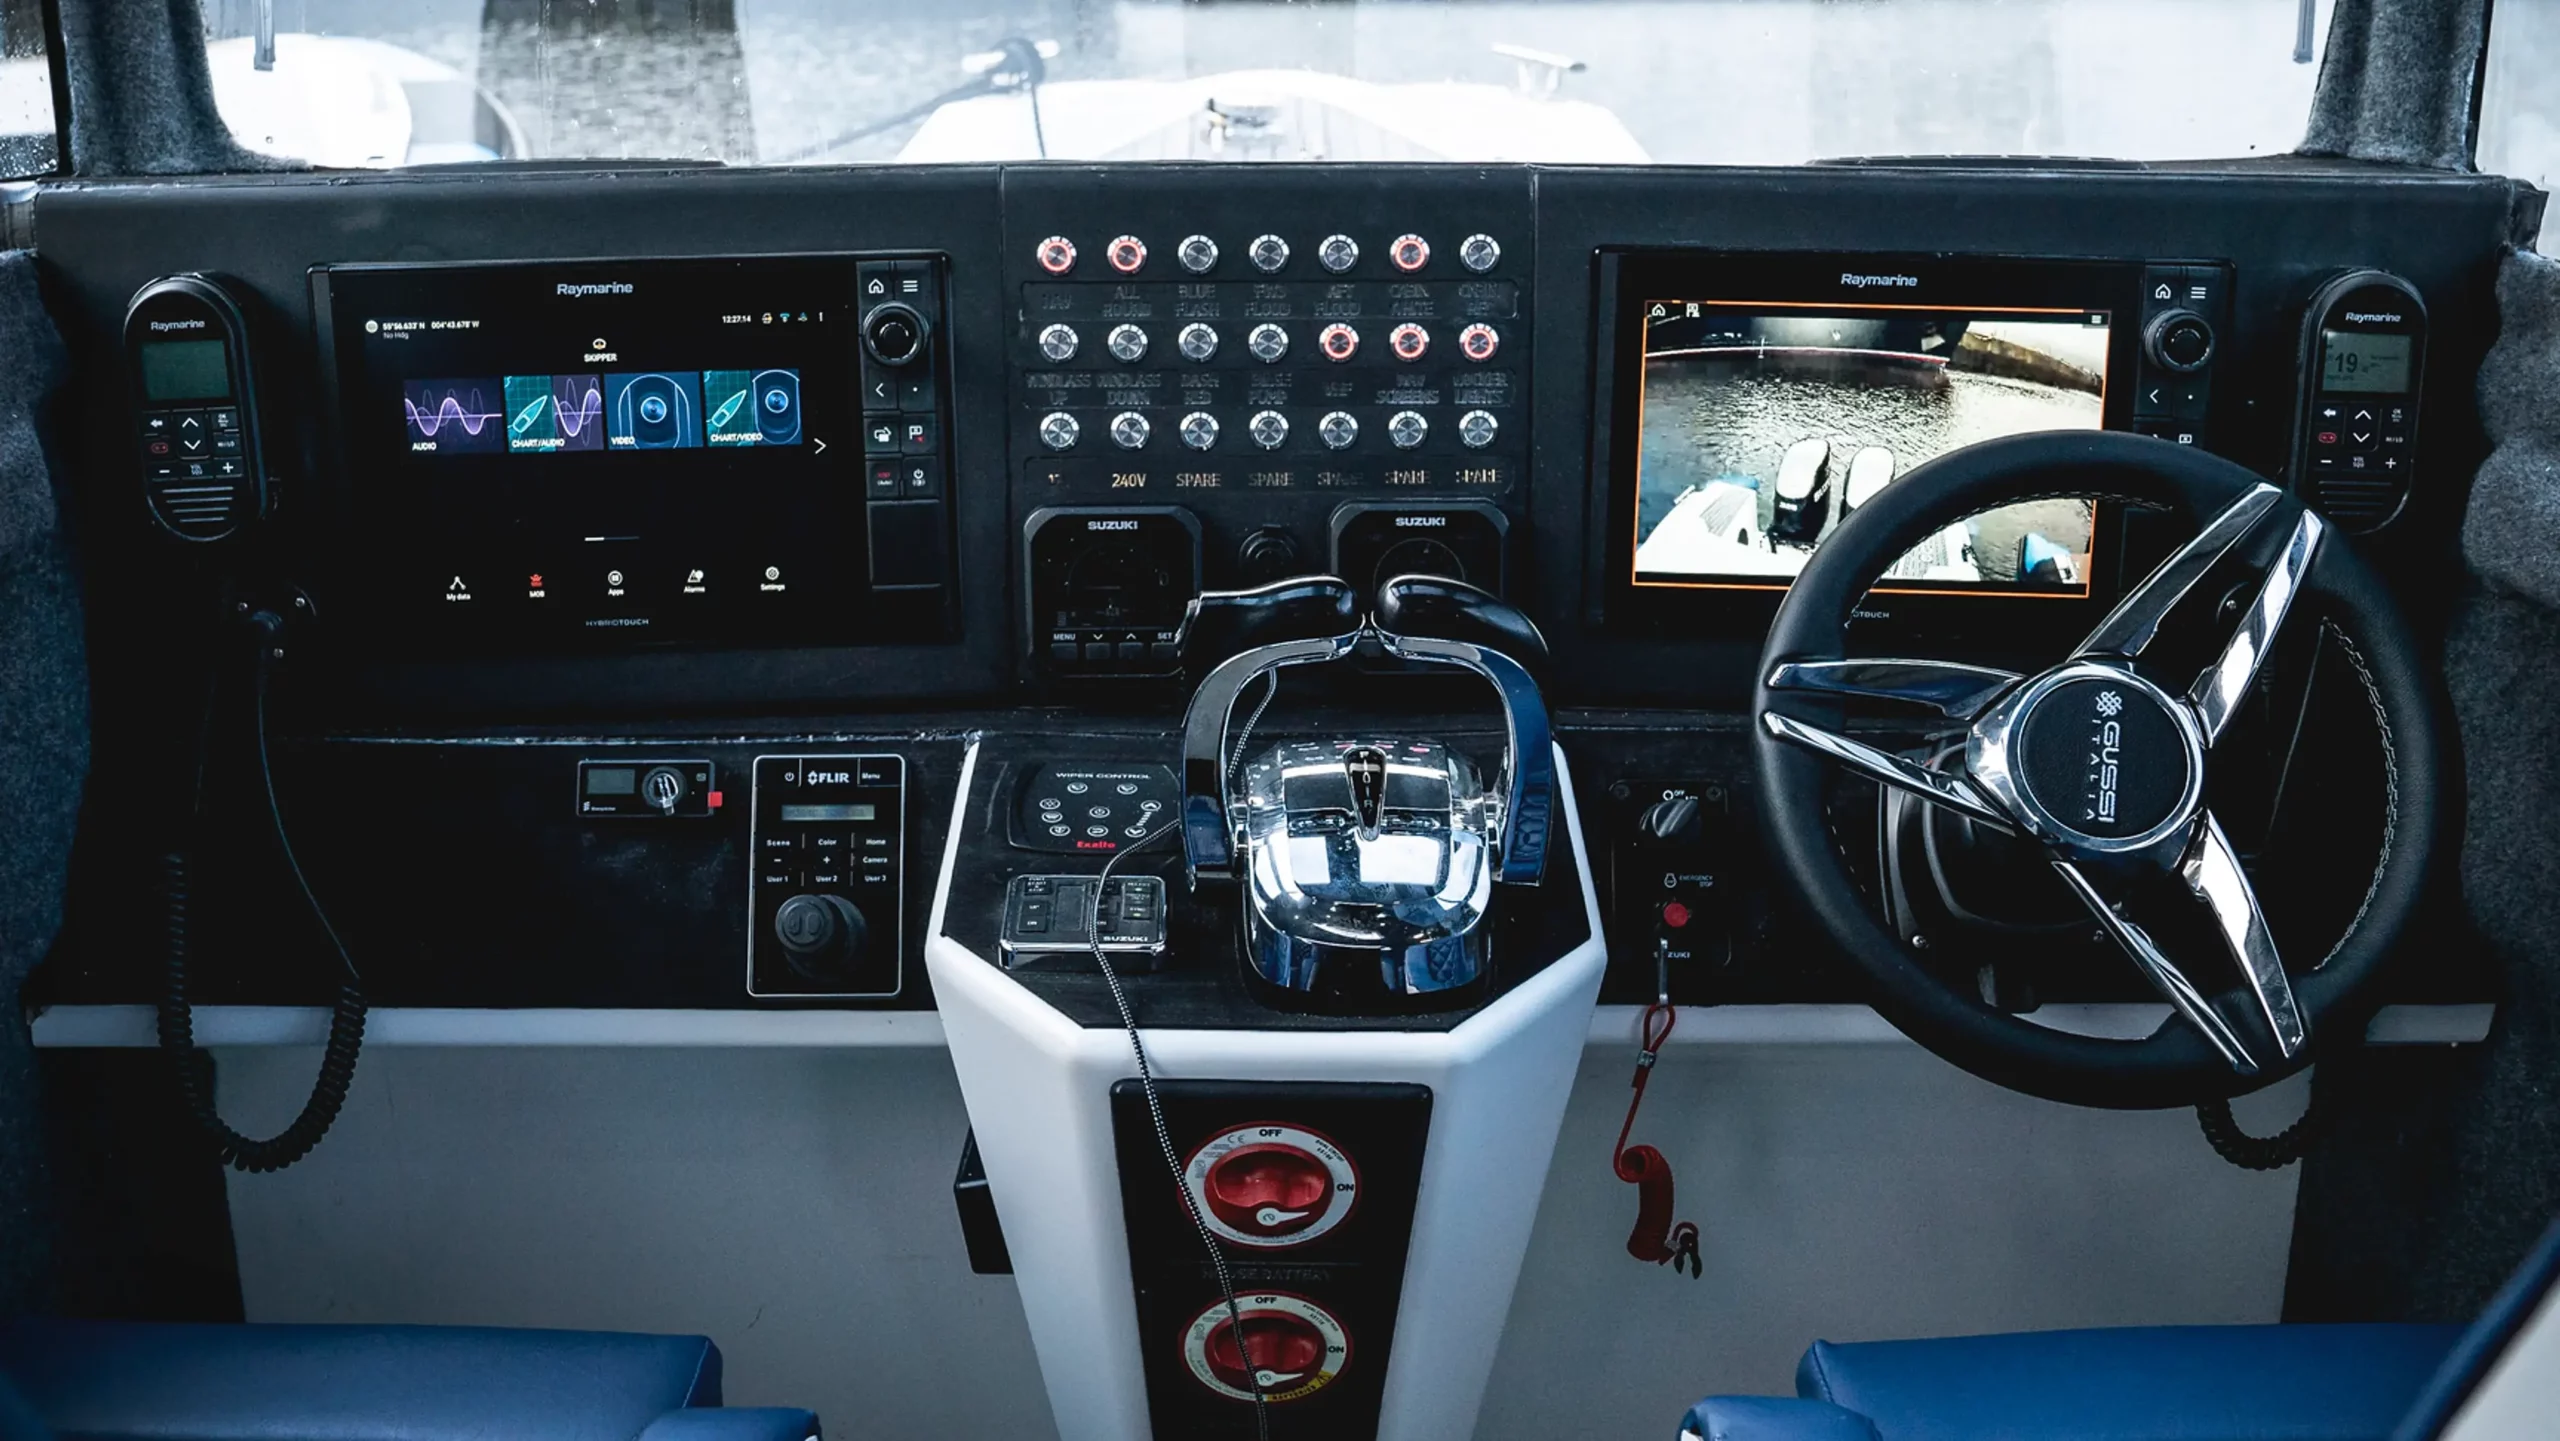 M-Class Ultimate Boats dashboard @ RIBs ONLY - Home of the Rigid Inflatable Boat